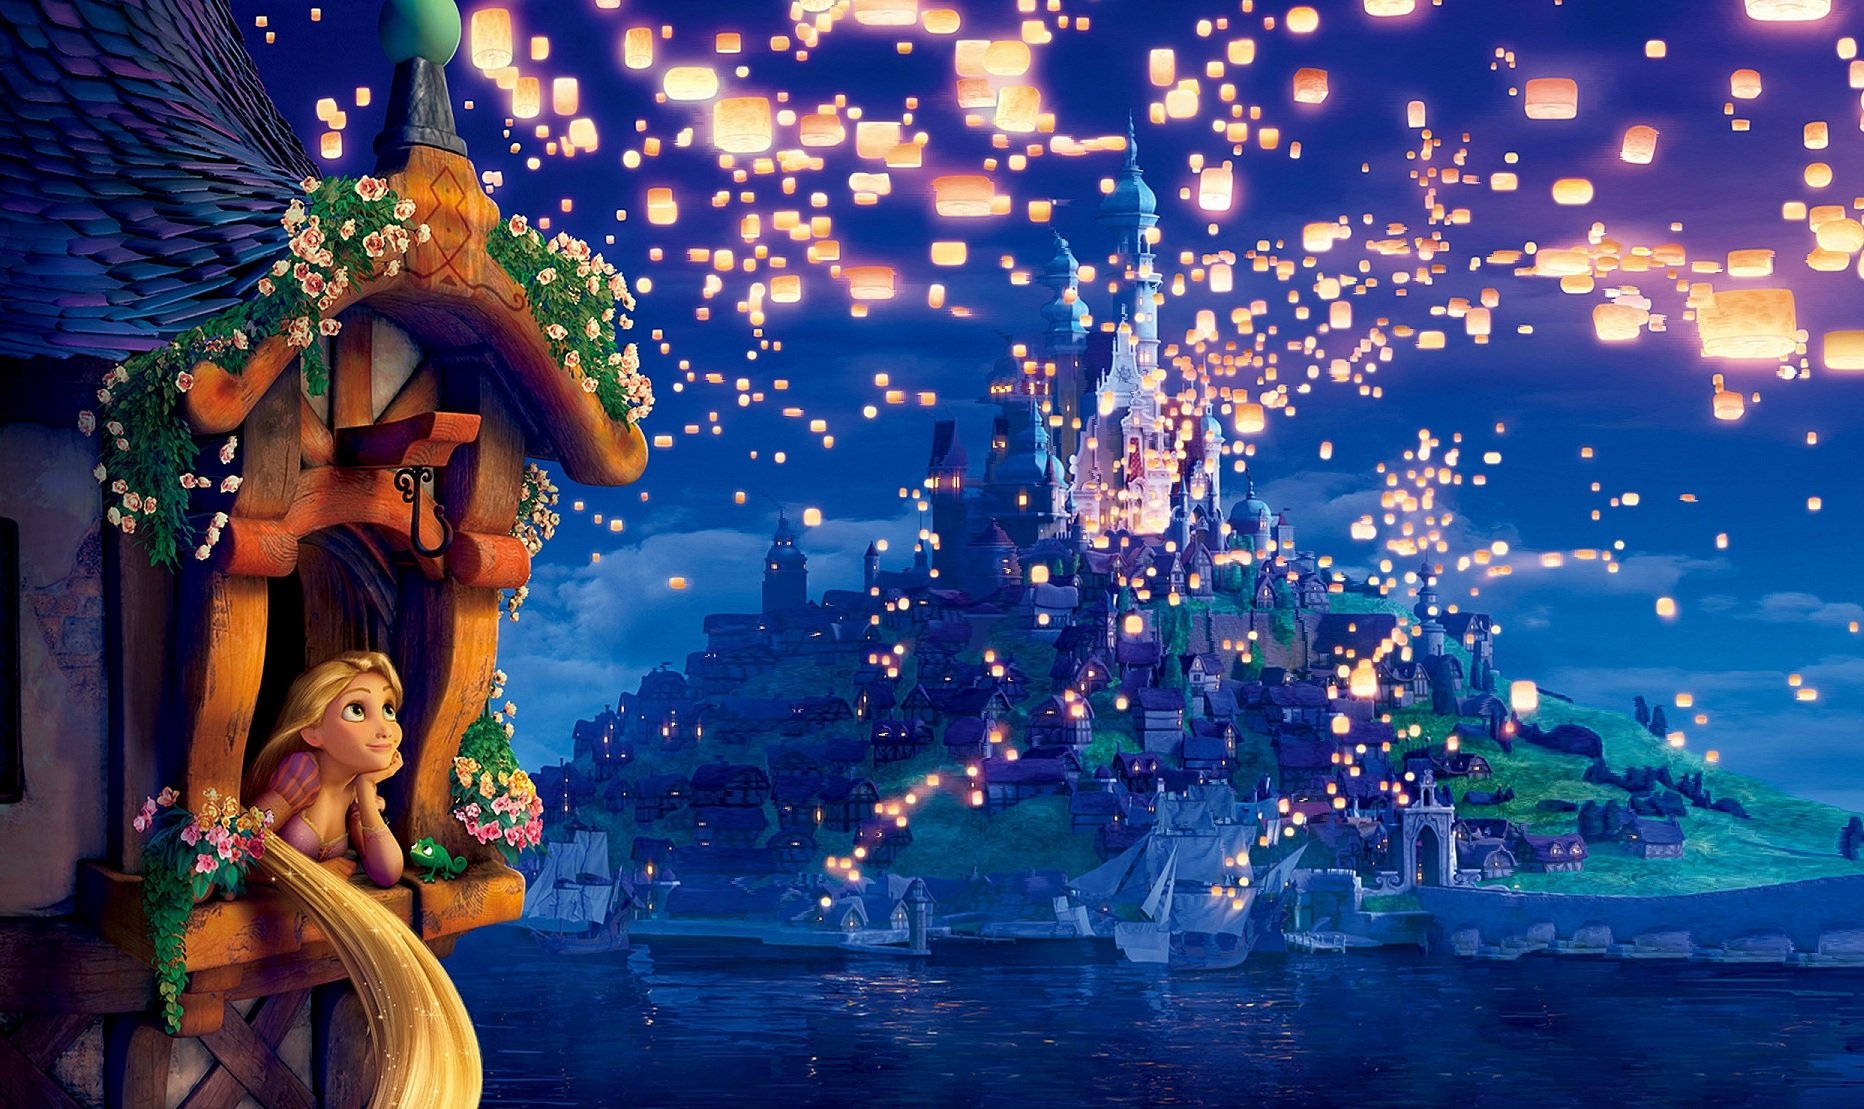 Images of Tangled | 1864x1109